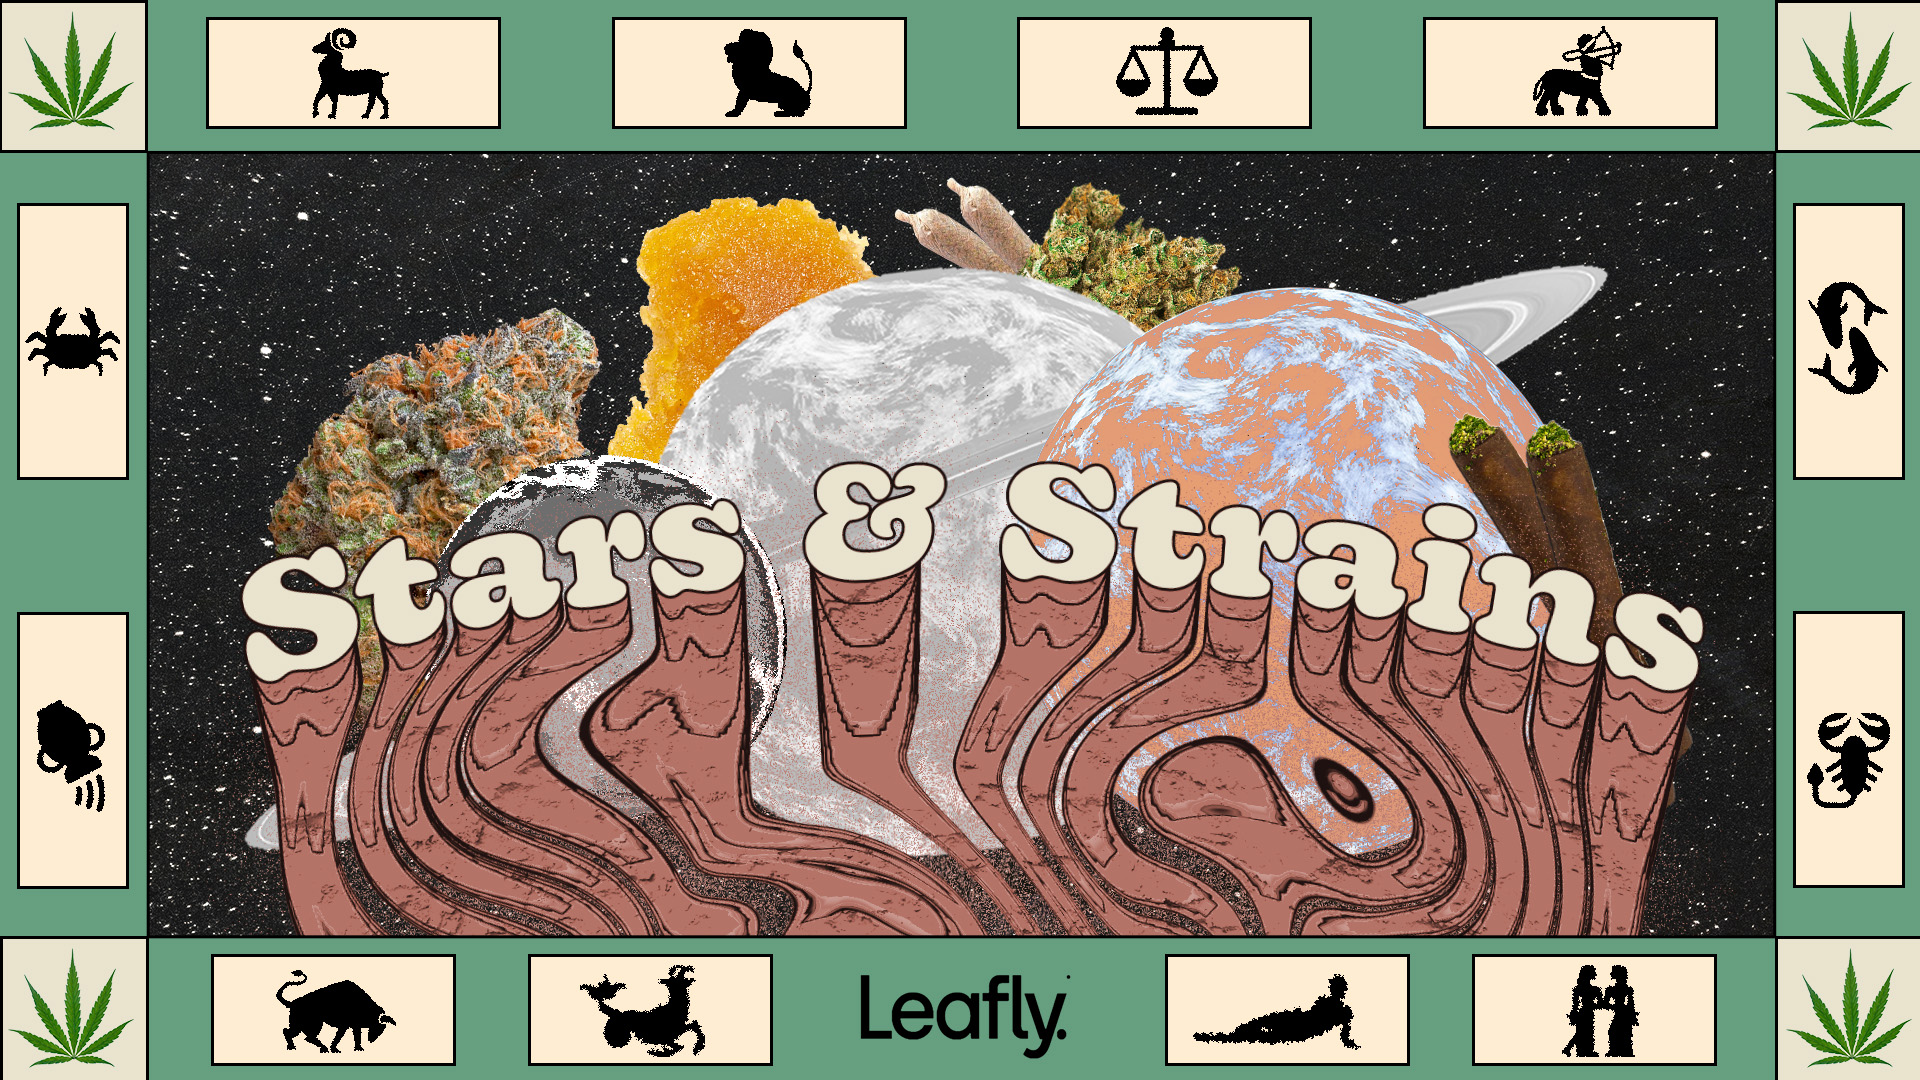 Star signs and cannabis strains: October 2022 horoscopes